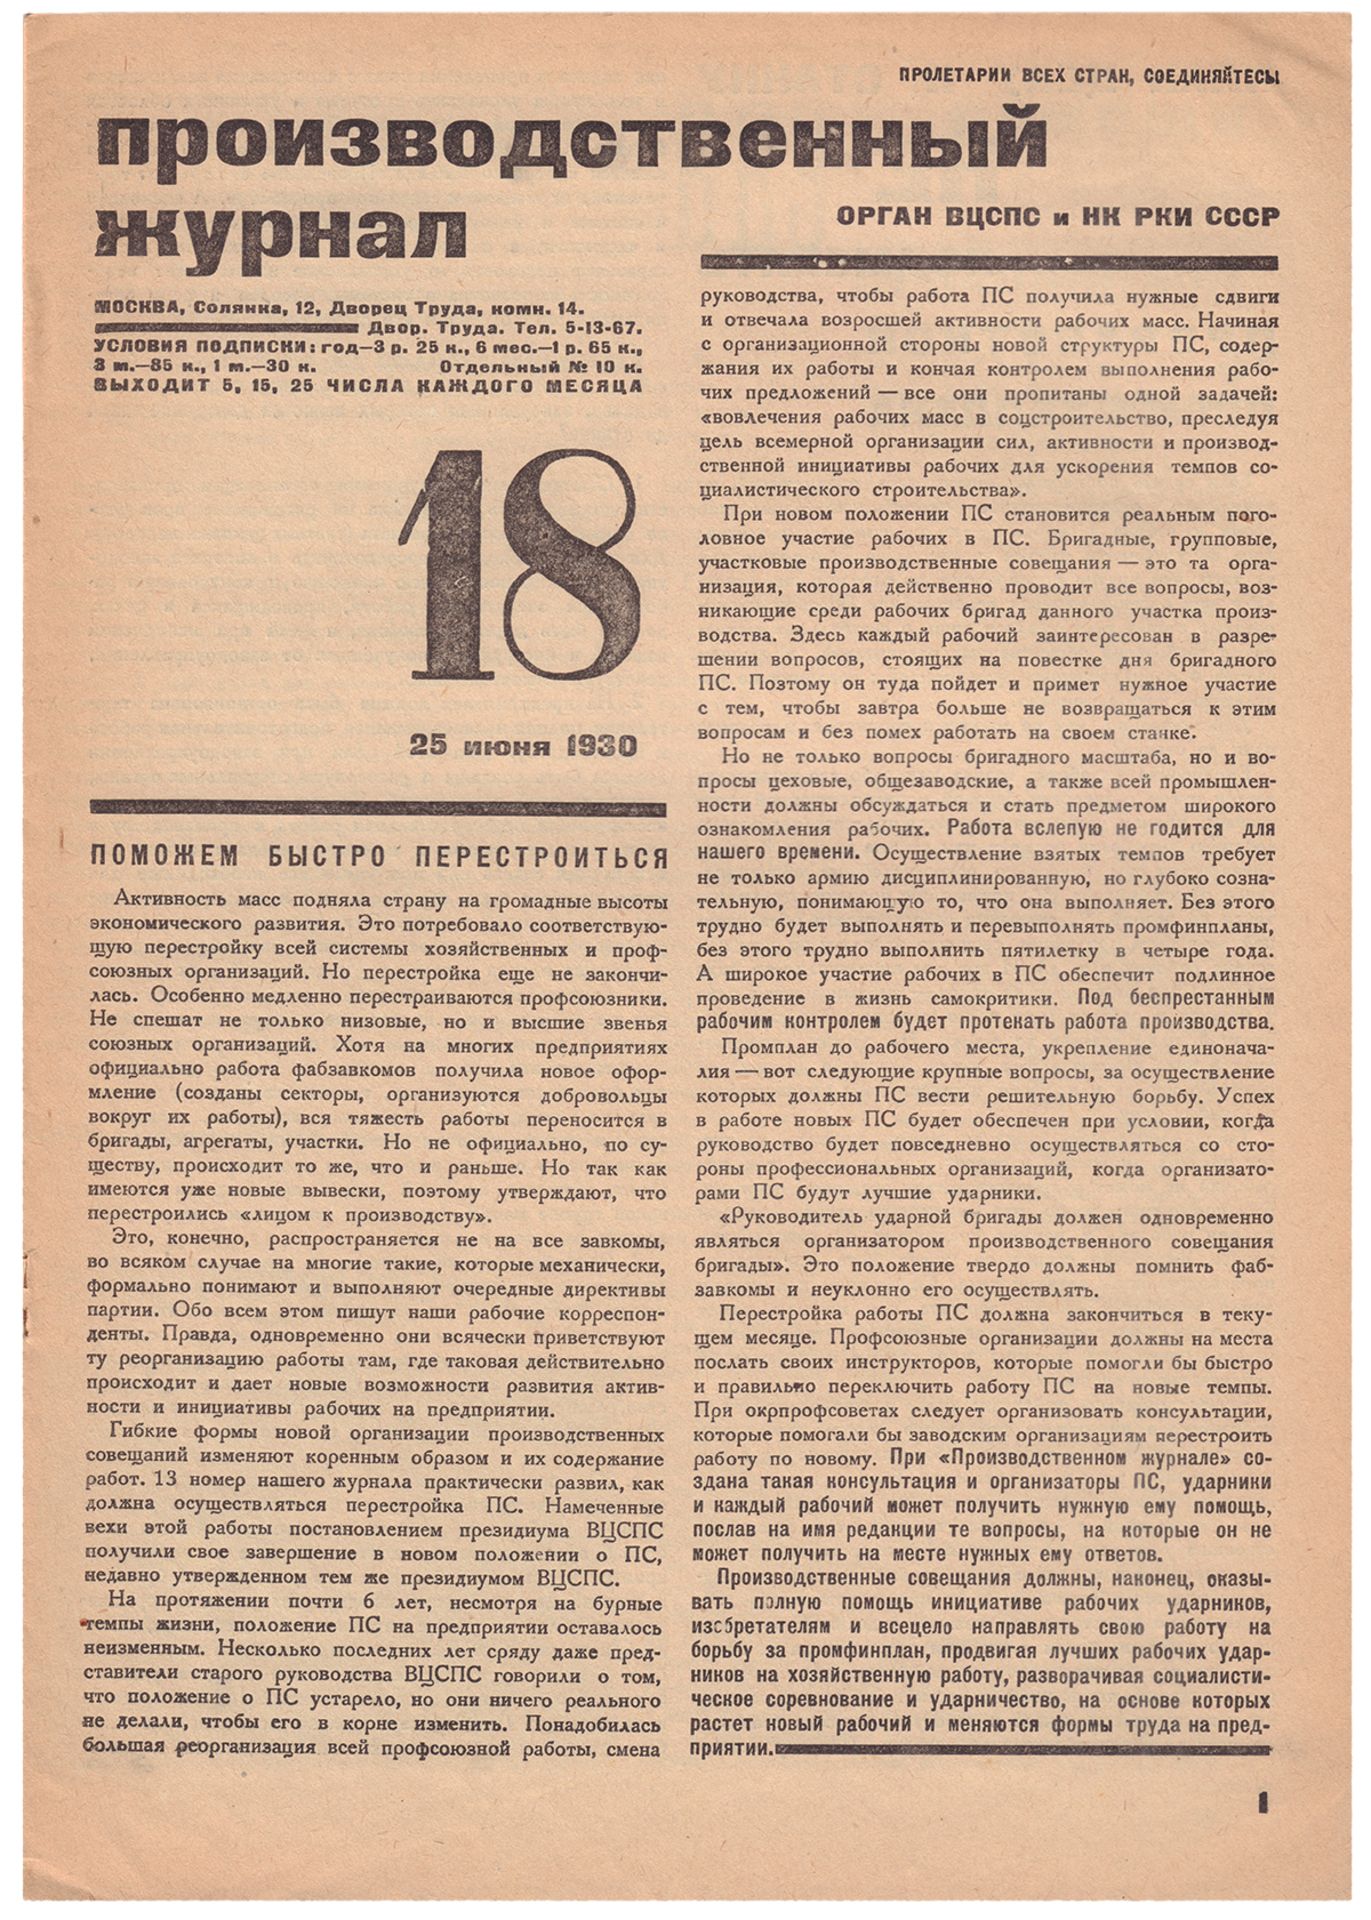 [Nekrasov, E., design. Soviet]. Magazine of Production. N-18, June 25th 1930. - Moscow, 1930. - 16 p - Image 2 of 2